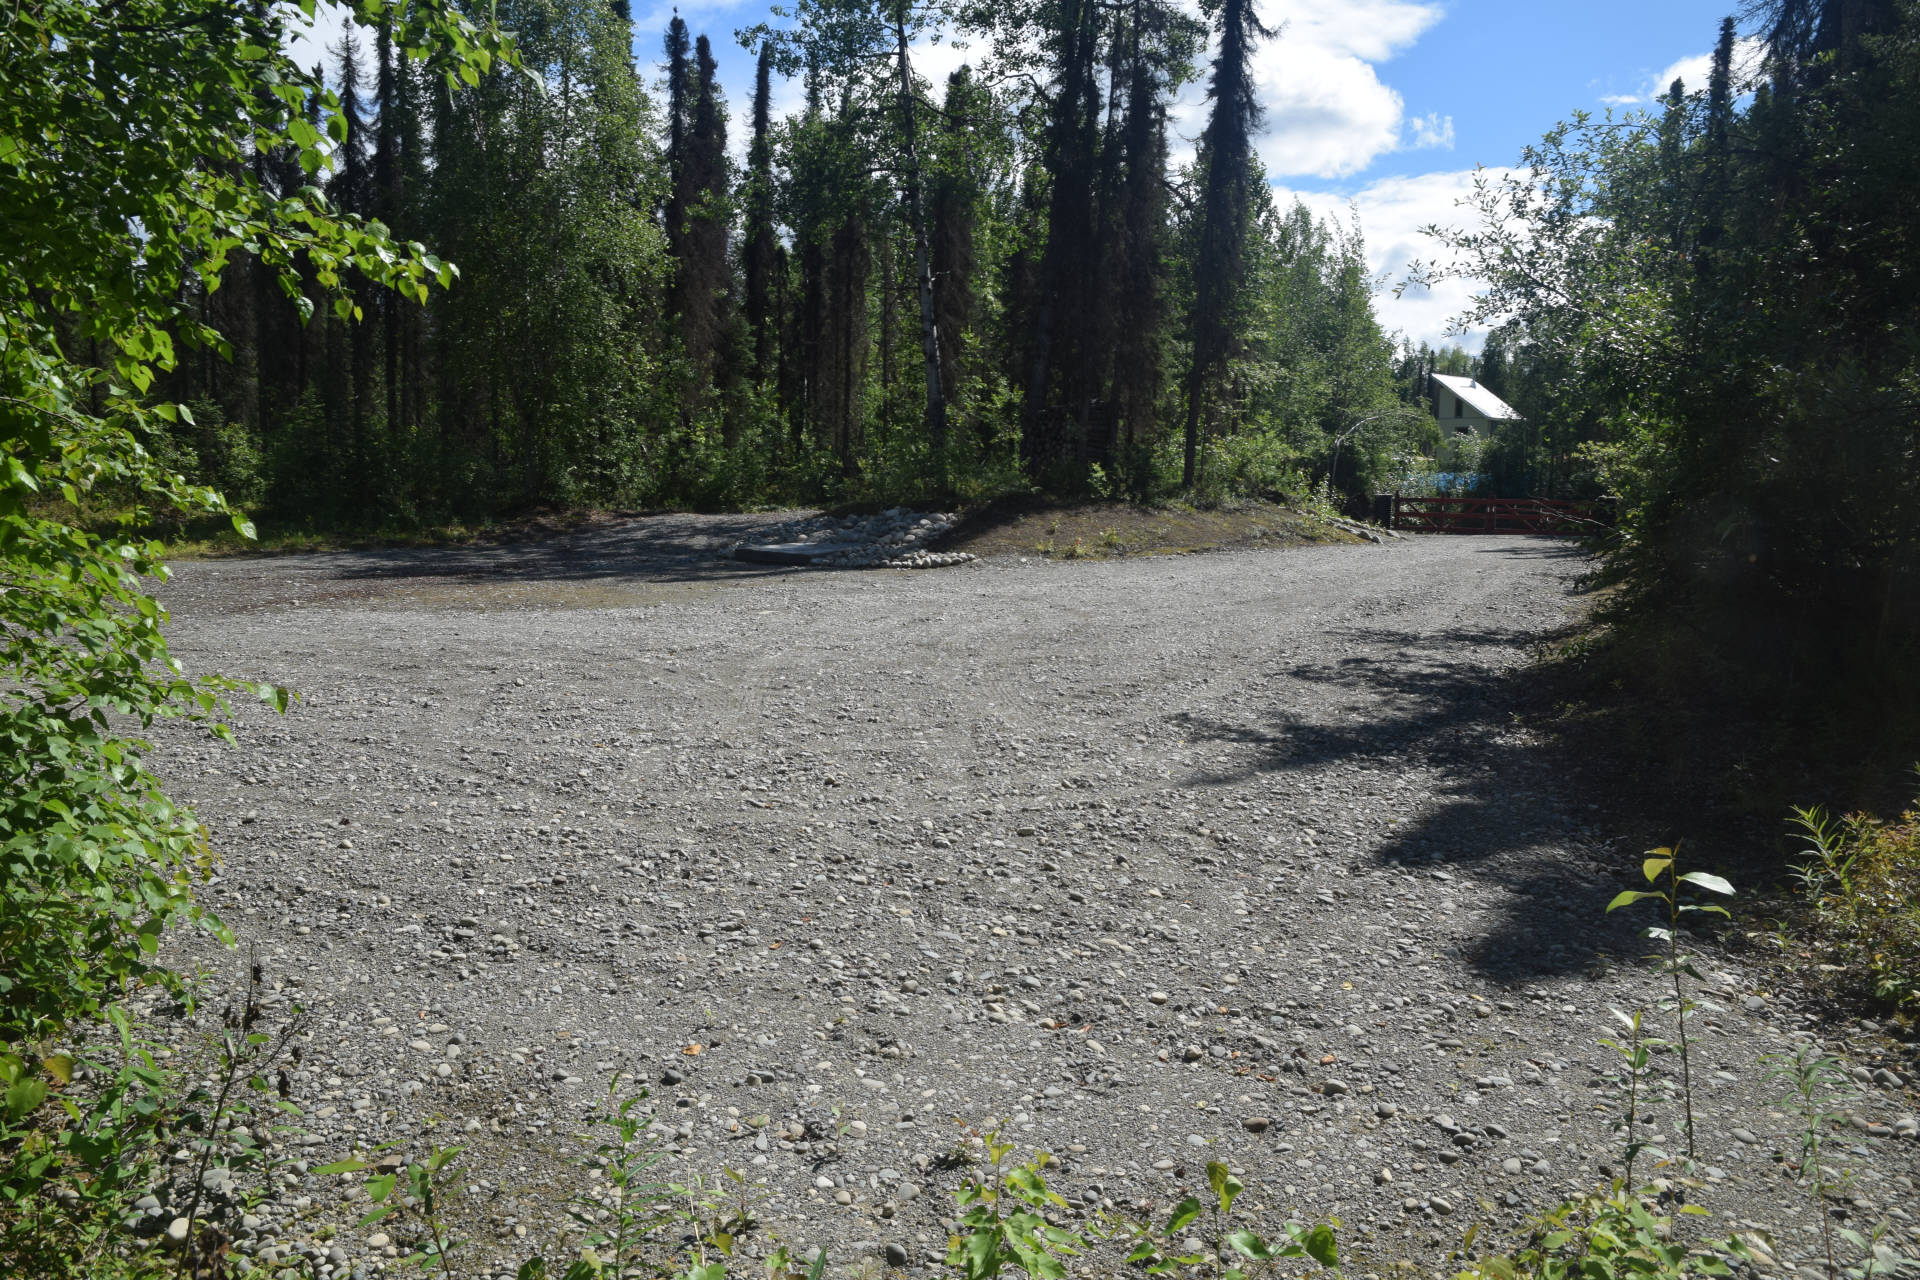 Gravel parking yard No. 1 for about 10 cars. Cars can be parked in any direction.